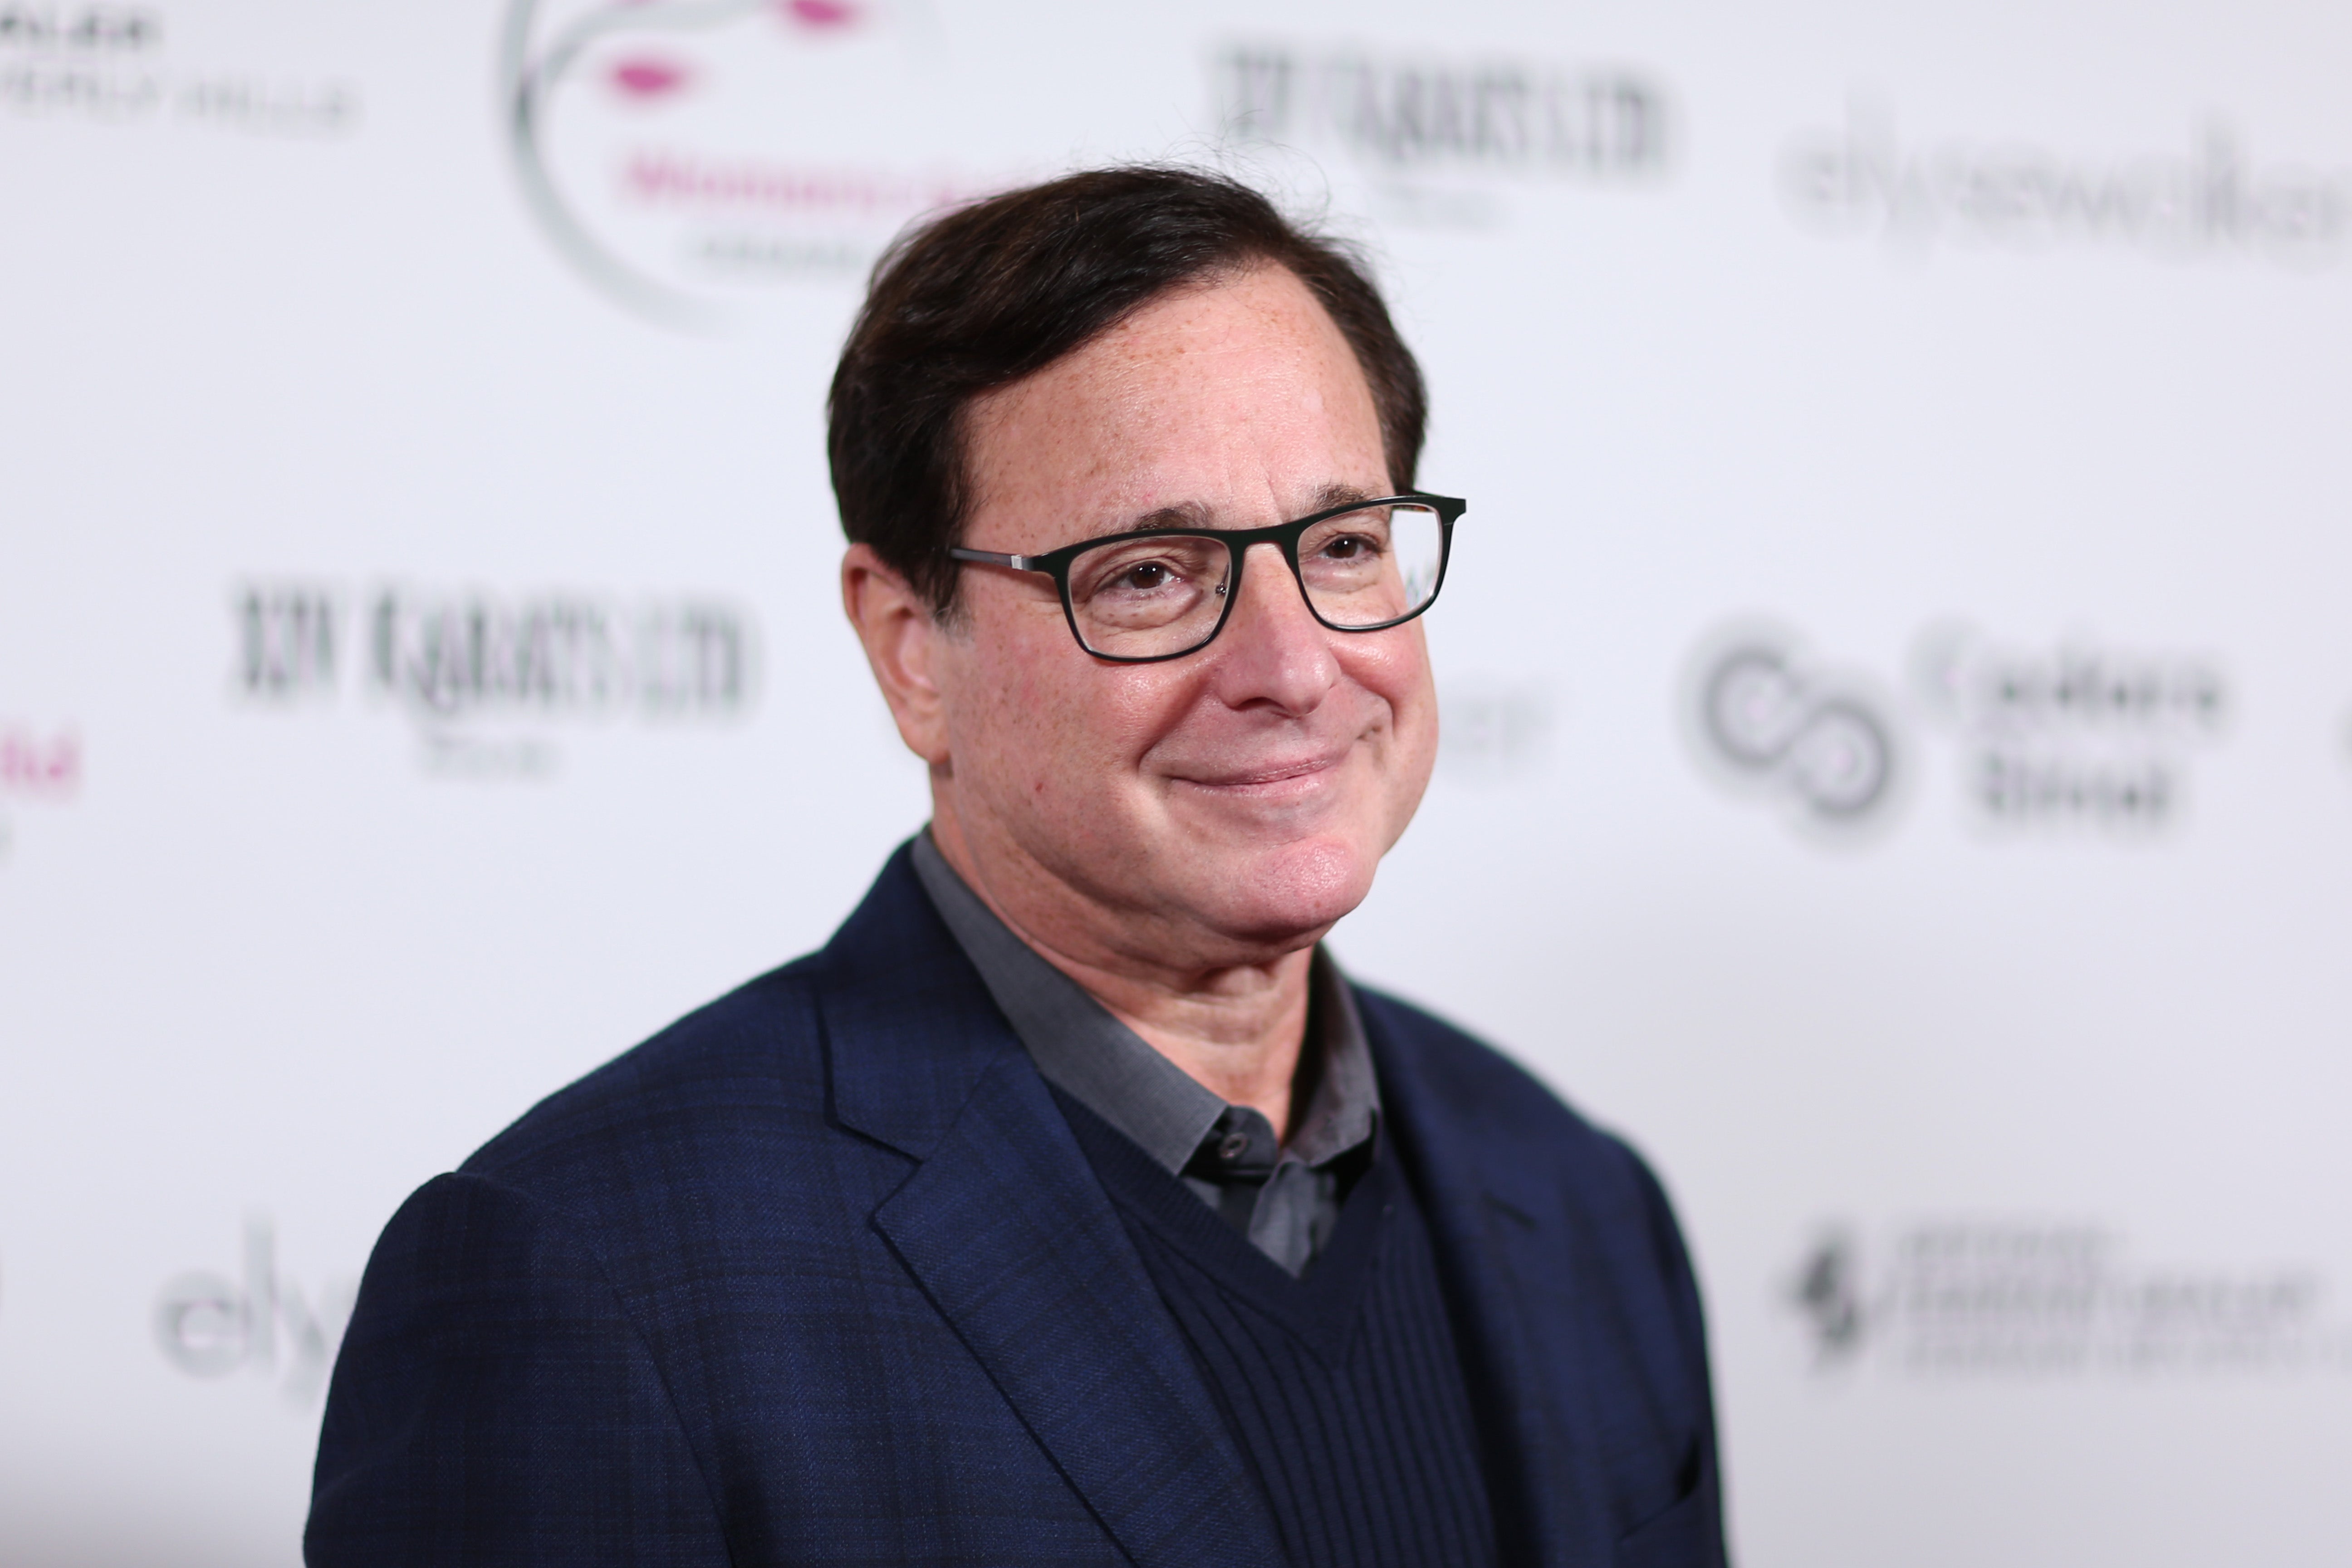 Bob Saget remembered by ‘Full House’ stars, widow Kelly Rizzo on what would have been his 67th birthday